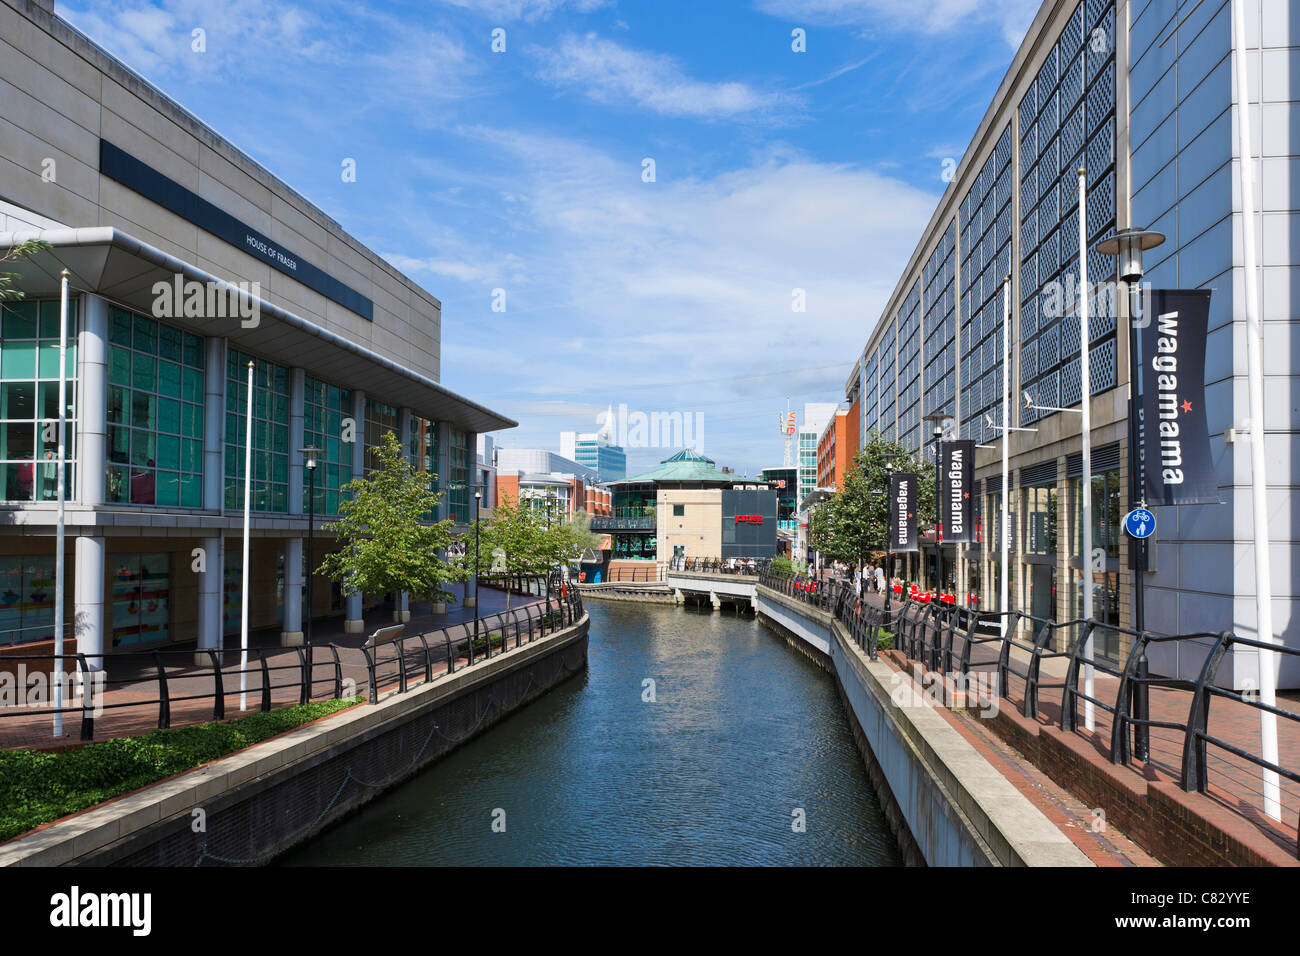 House of Fraser and Wagamama Restaurant on banks of River Kennet in Oracle Shopping Centre, Reading, Berkshire, England, UK Stock Photo